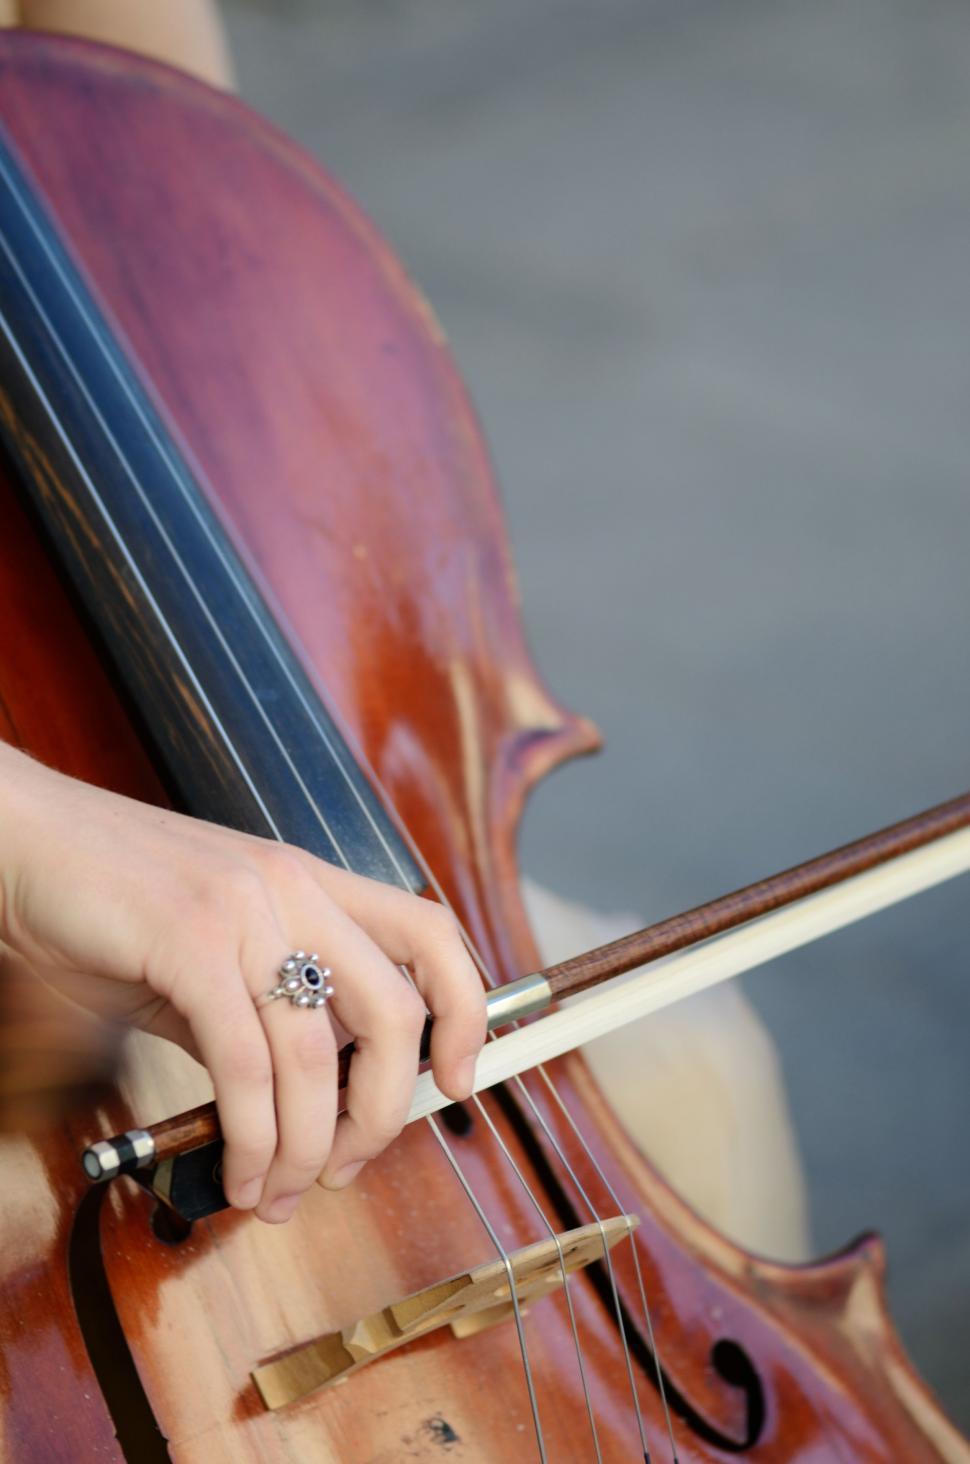 Free Image of Cellist playing cello 